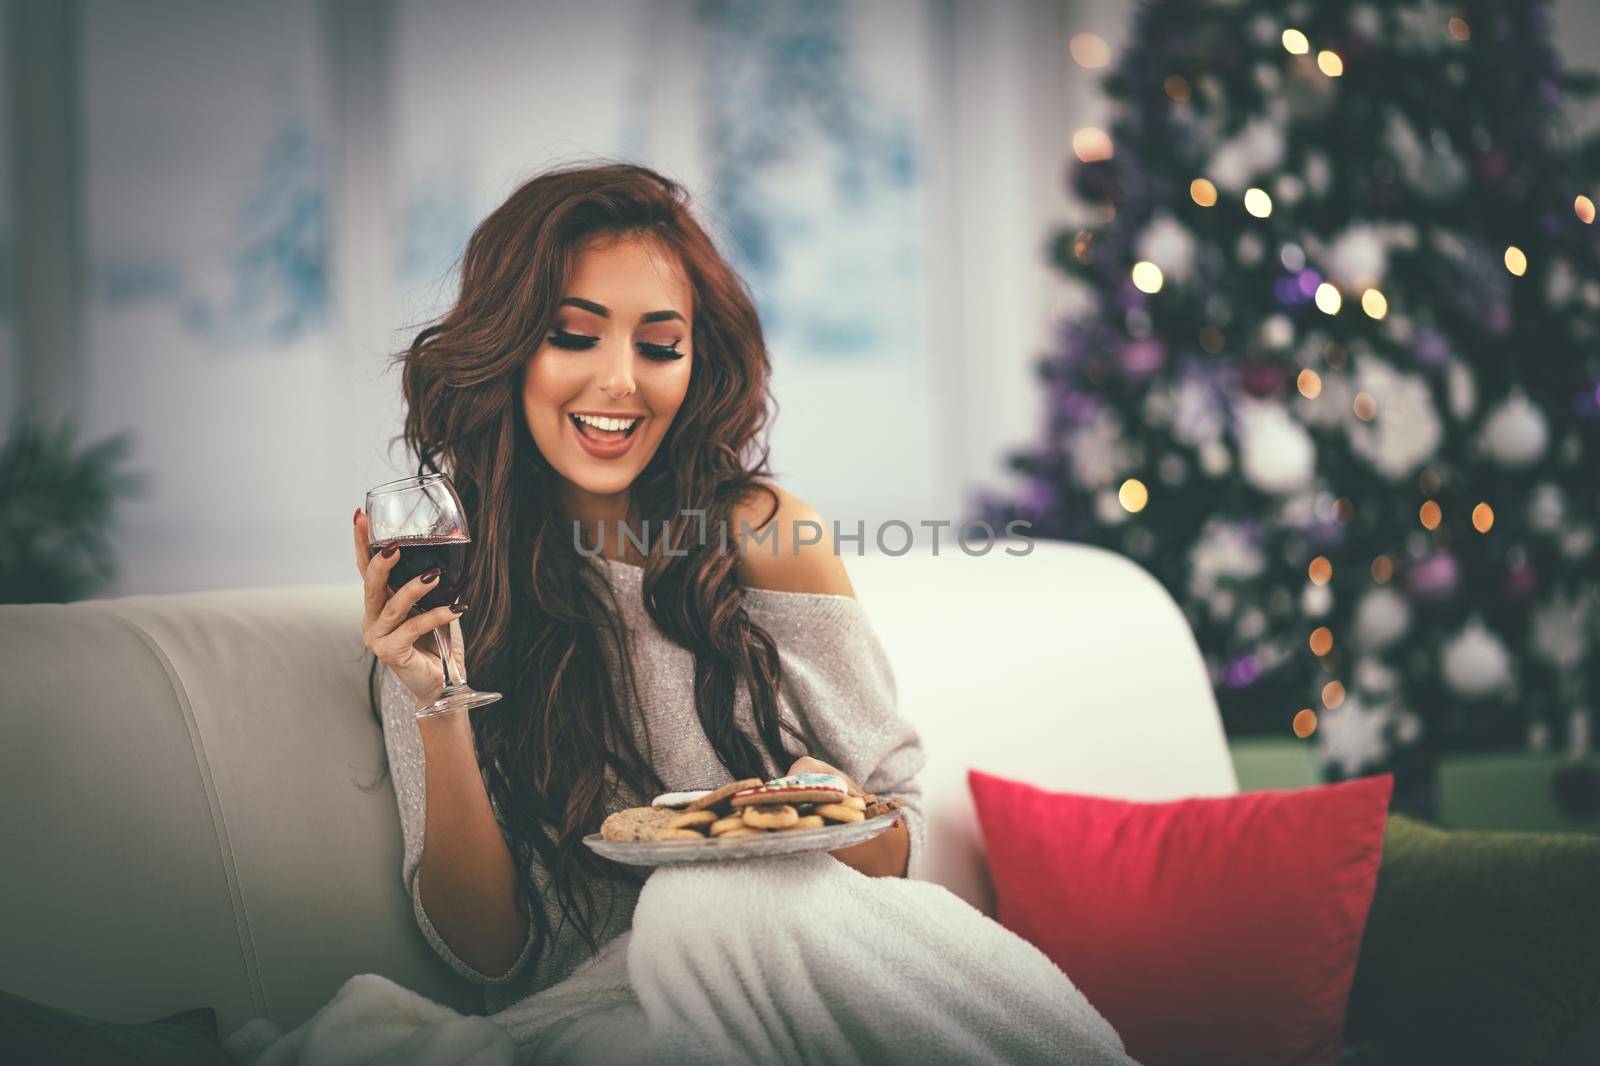 Beautiful smiling girl relaxing in bed with gingerbread cookie and glass of black vine.